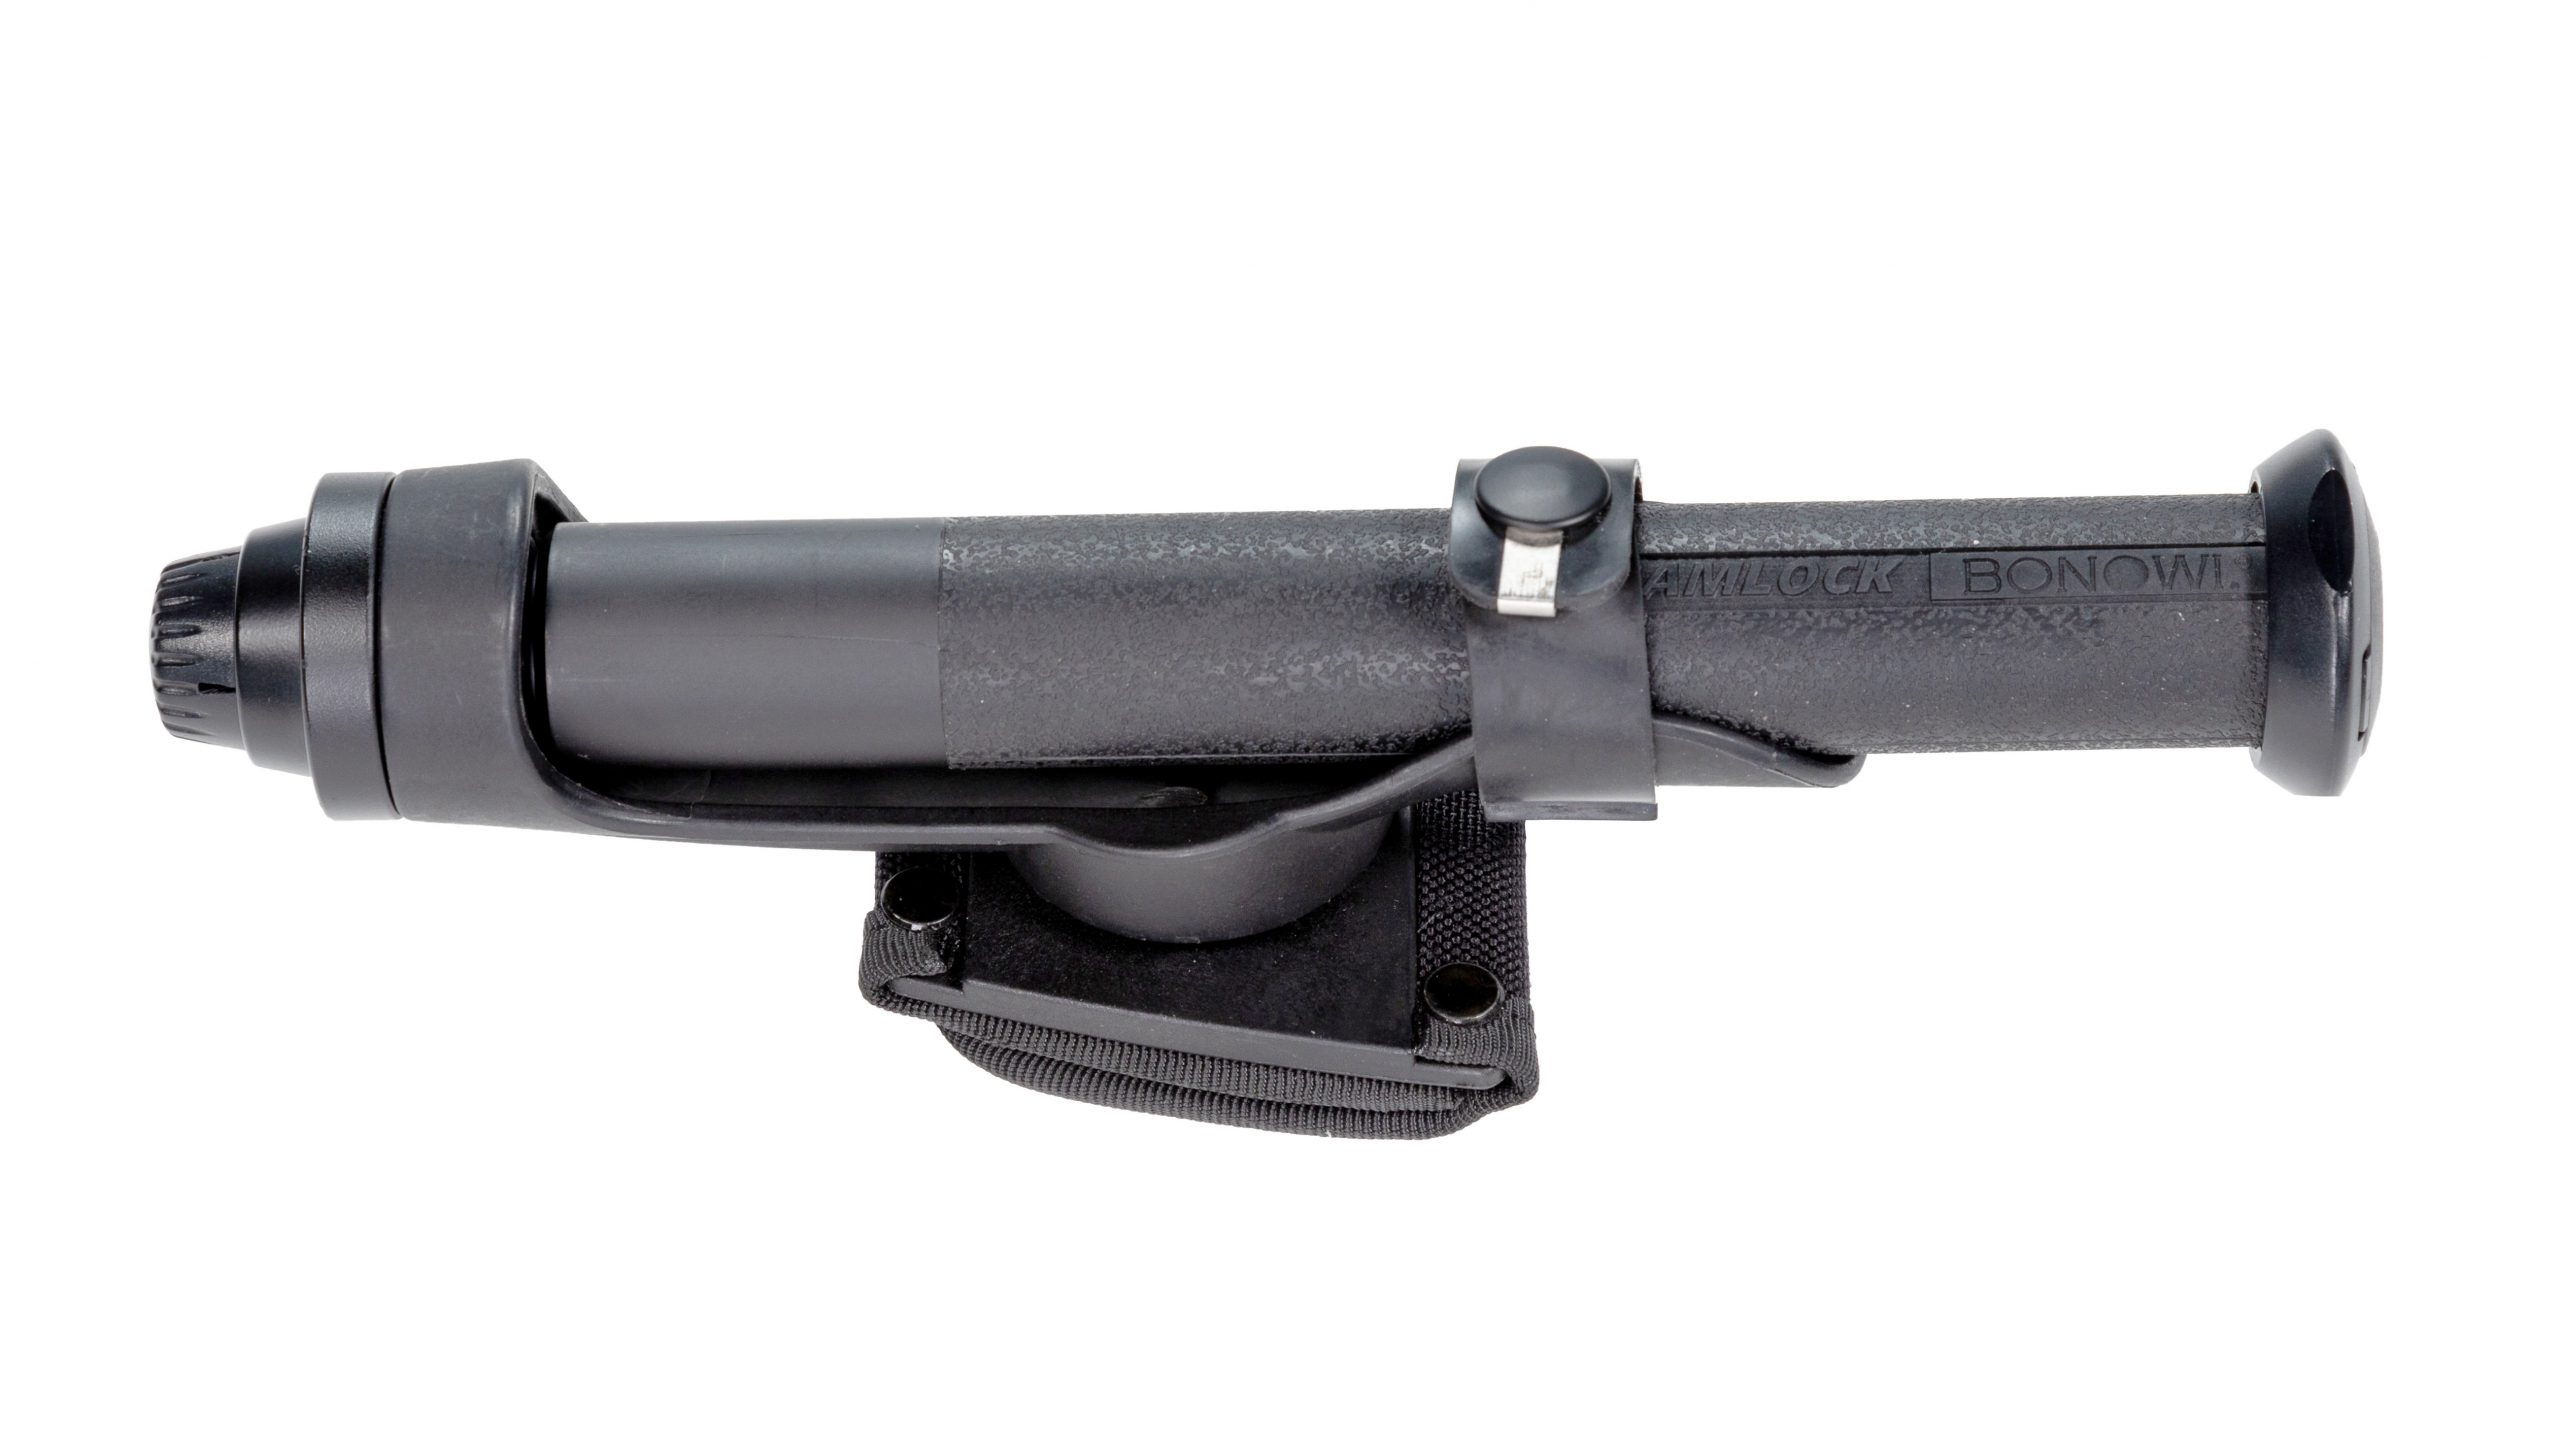 The H1 belt holster was specially developed for the Bonowi EKA CAMLOCK® Baton and is able to accommodate the baton with a attached attached Defense Adapter.